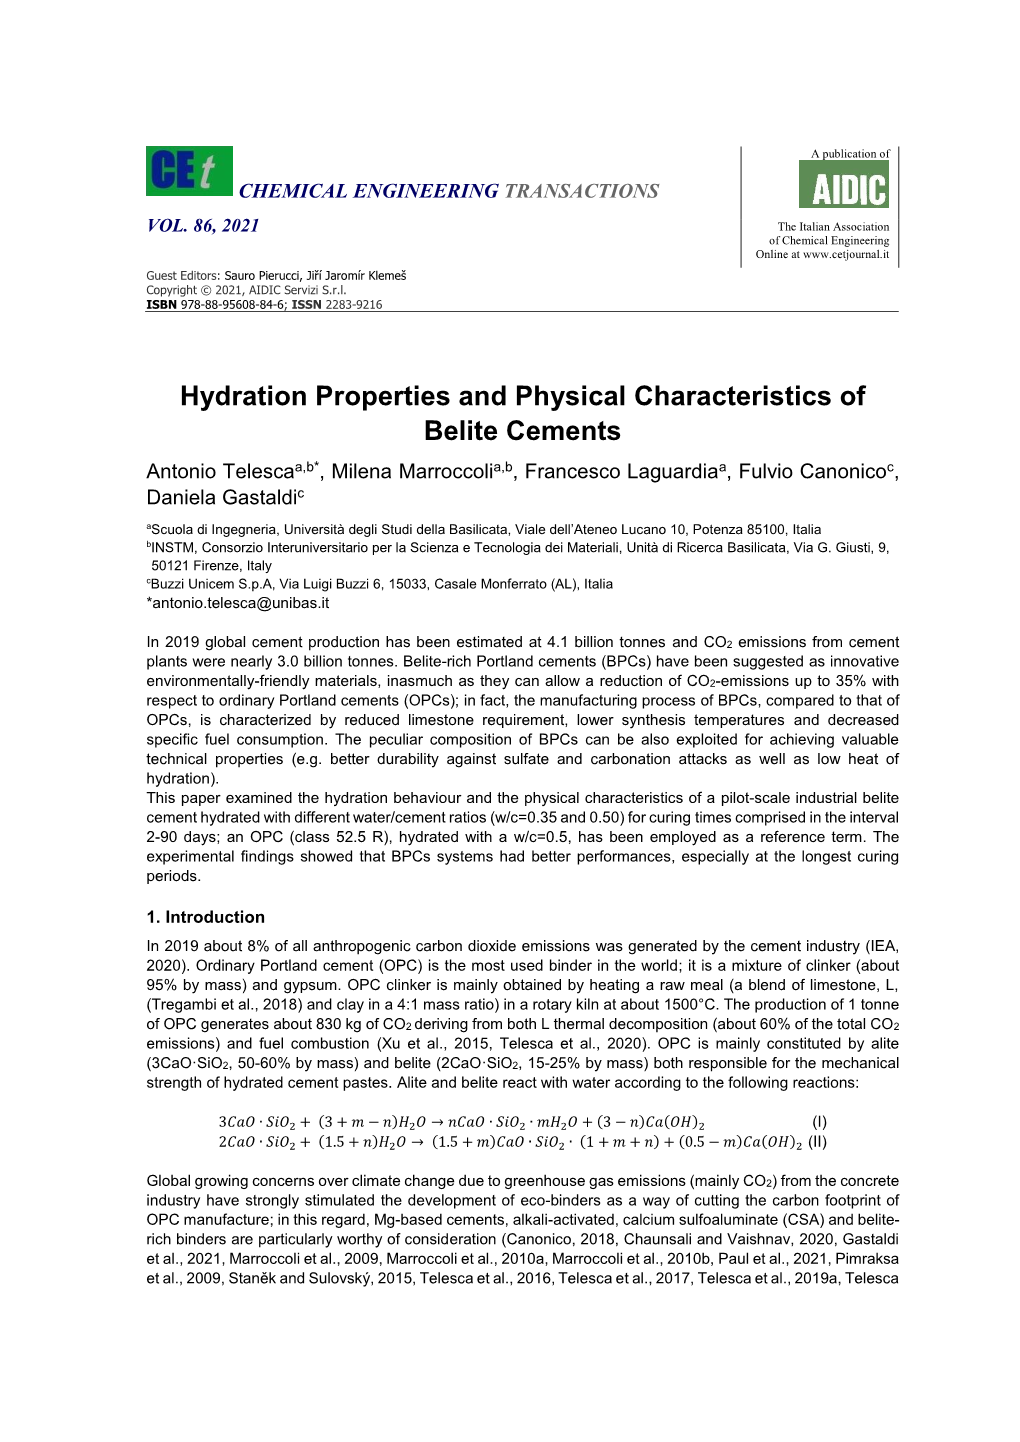 Hydration Properties and Physical Characteristics of Belite Cements